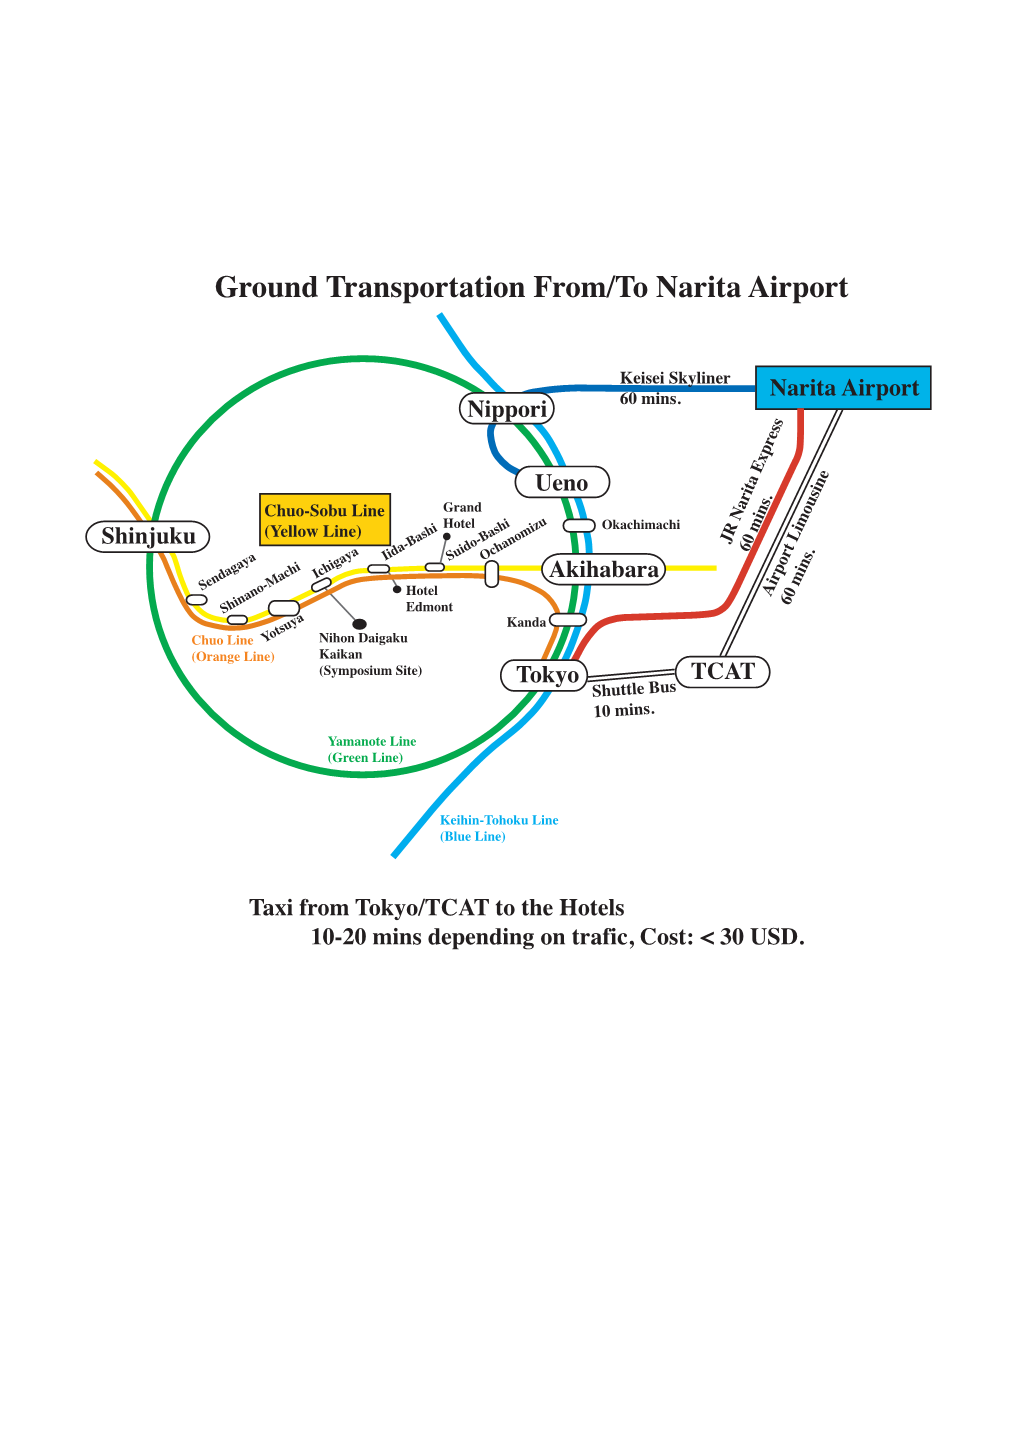 Ground Transportation From/To Narita Airport